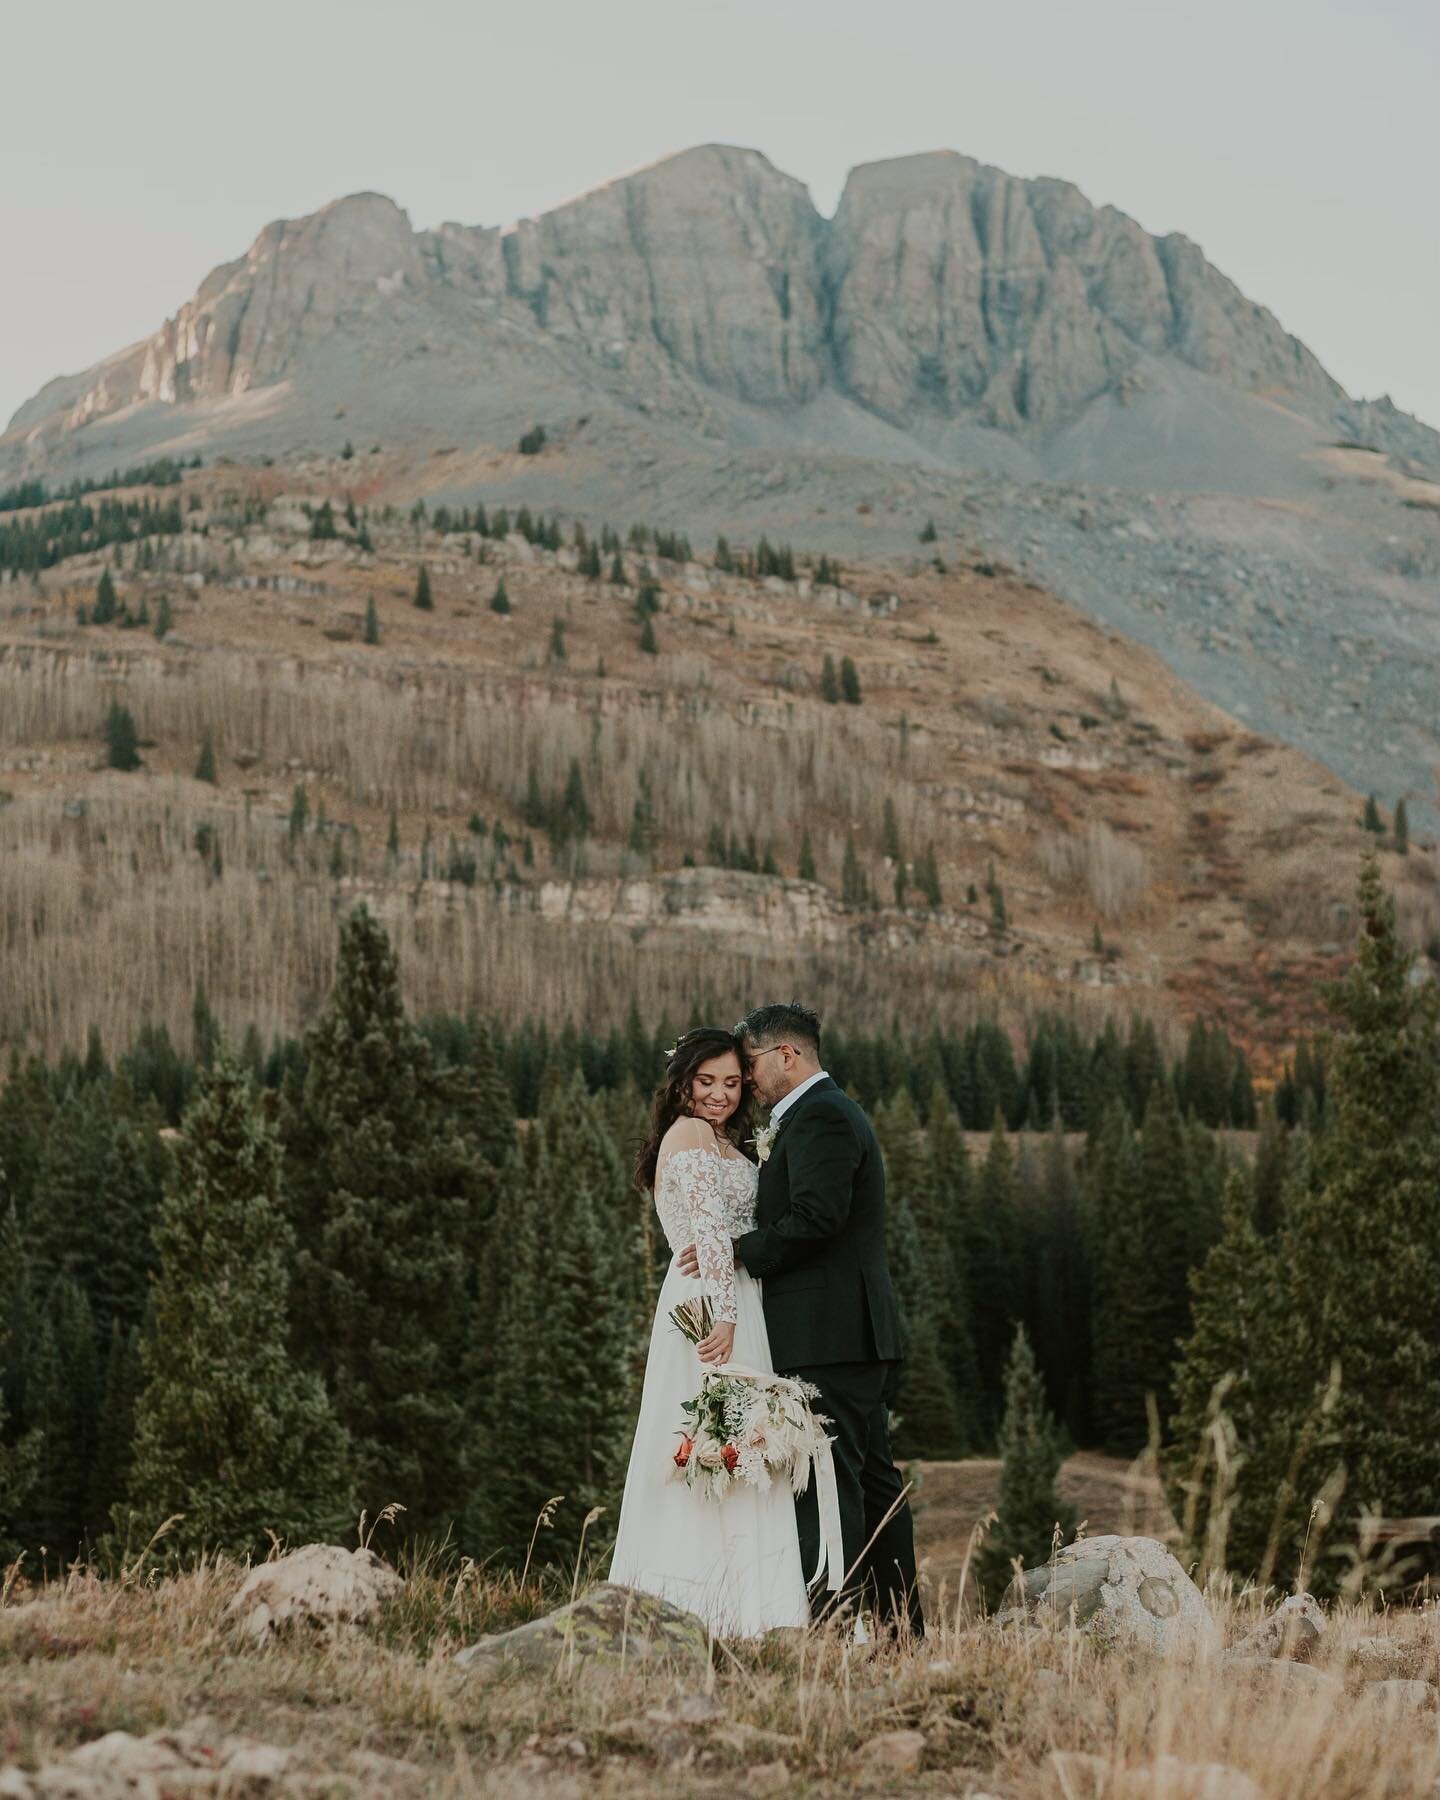 Another perfect day in the mountains with Gabi + Josh. 🤍

Planner: @mountainesquewed 
Video: @cdphotoandfilm